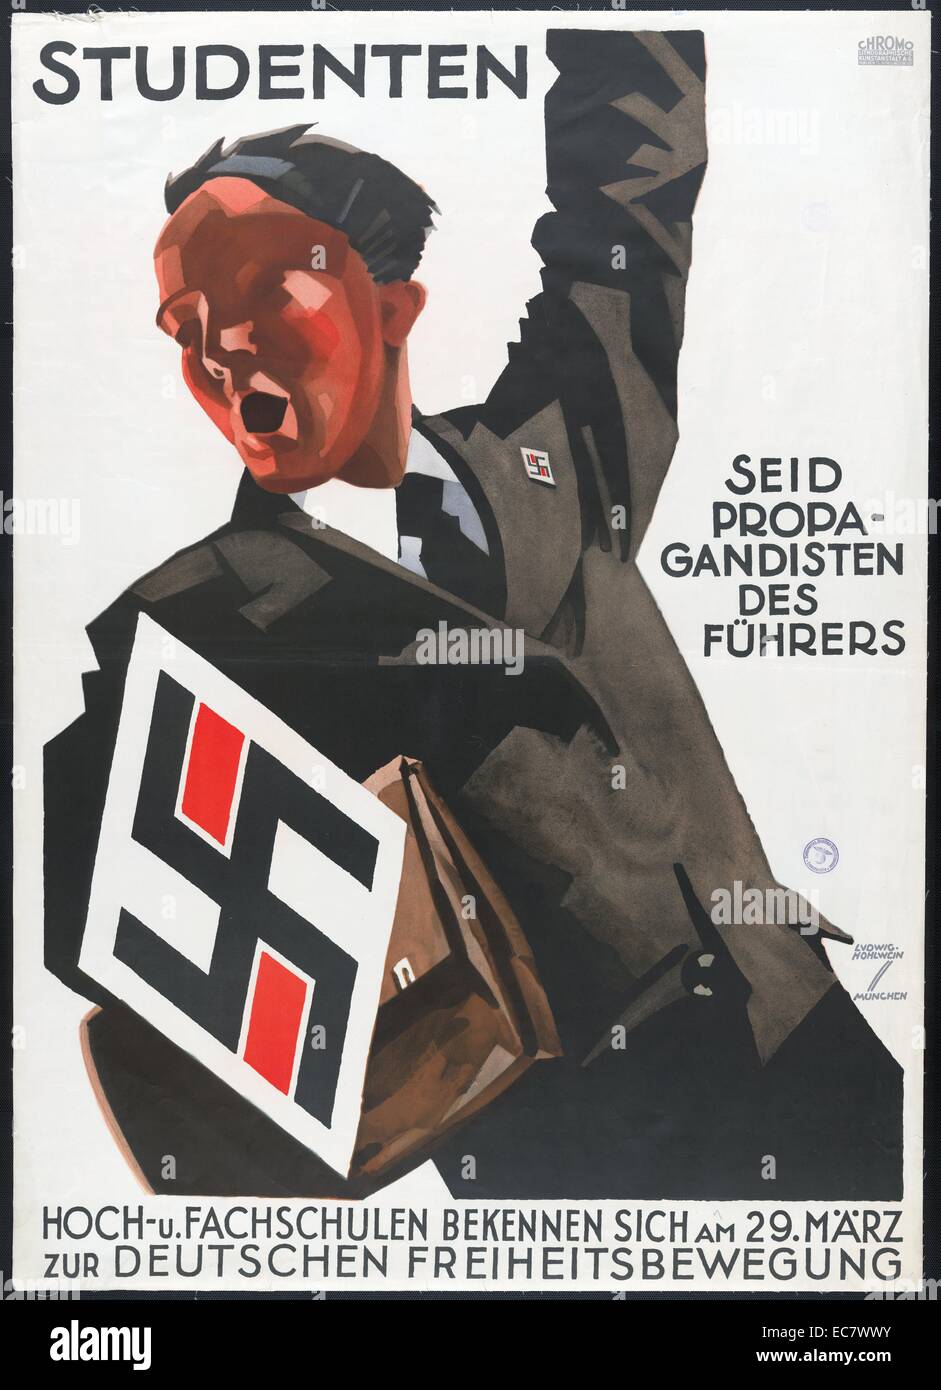 Poster shows a man with left arm raised calling out to students to become propagandists for the Führer; a large swastika in the lower left corner mirrors that on his lapel. The man also asks that universities and trade schools commit to the German freedom movement on March 29th. Stock Photo